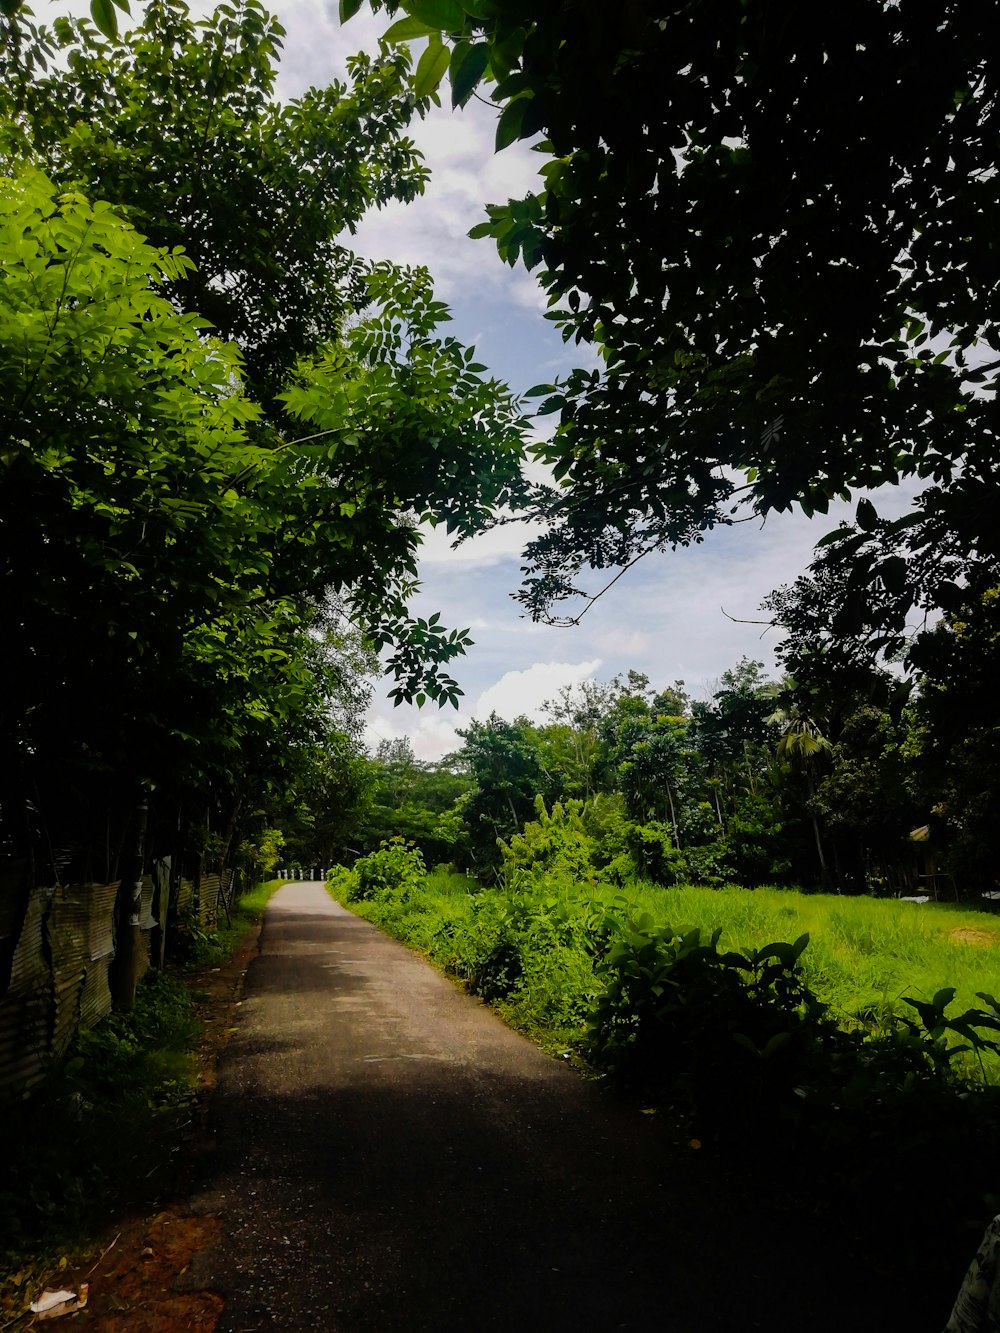 gray concrete road between green trees under white clouds and blue sky during daytime